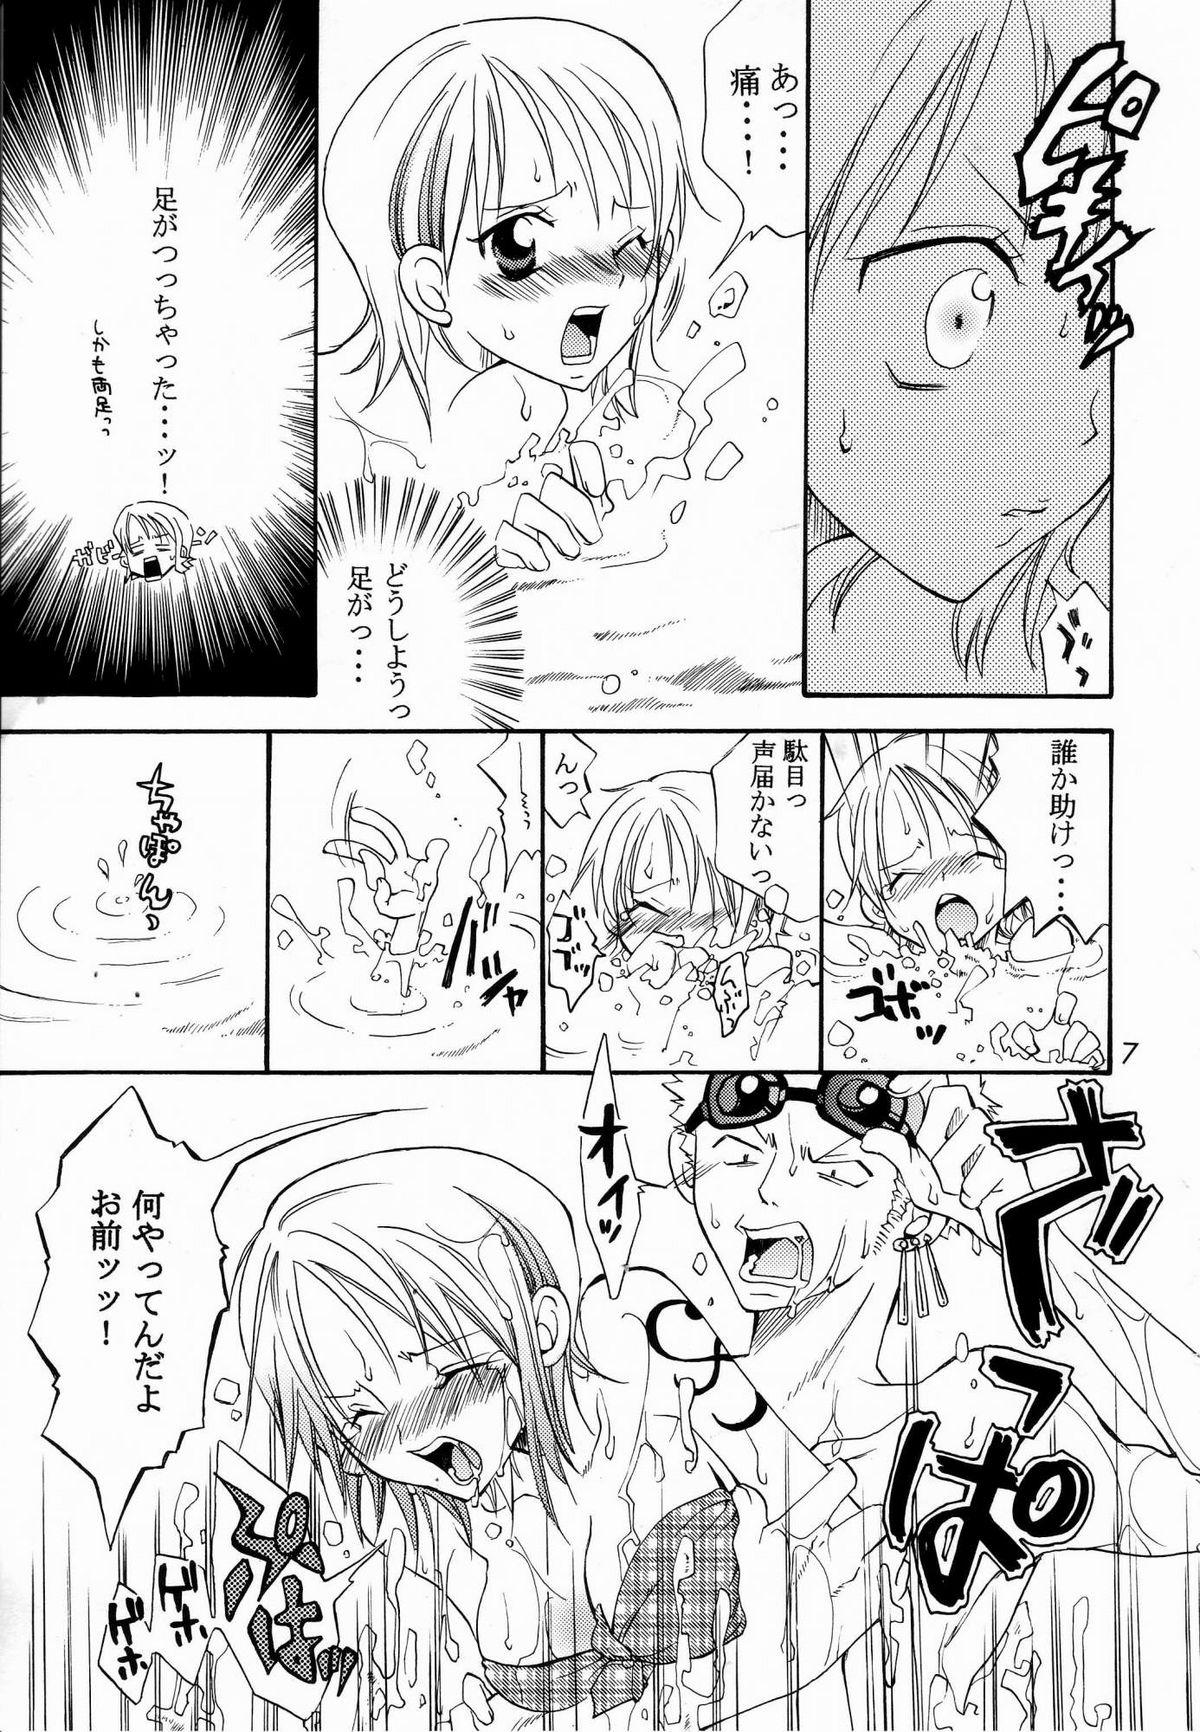 Thot Shiawase Punch! 5 - One piece Nipples - Page 6